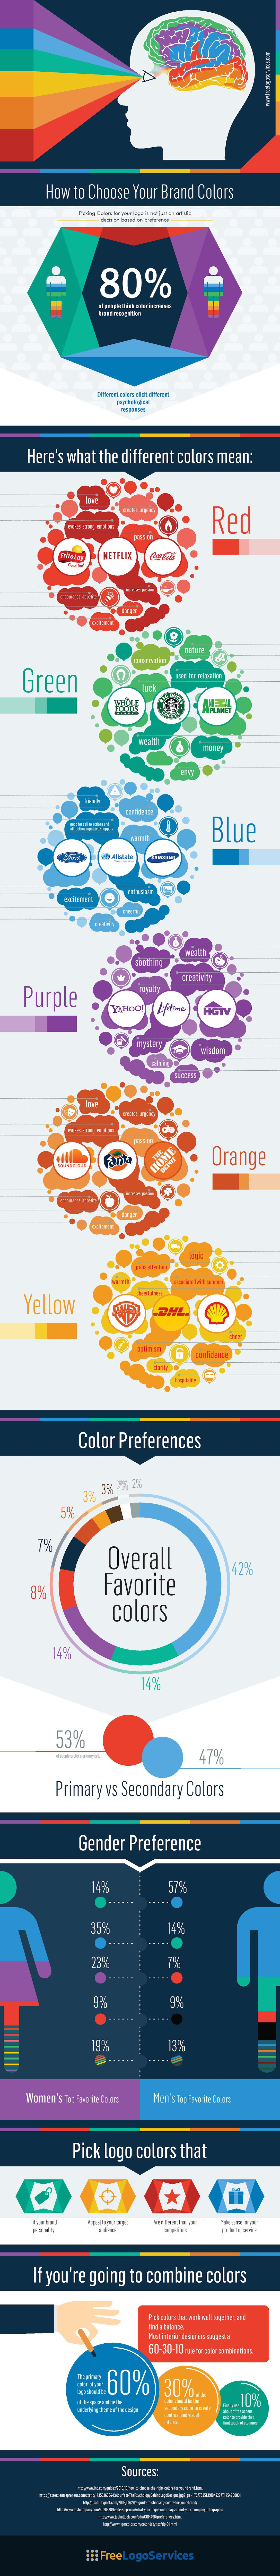 How to choose the best color scheme for your logo design